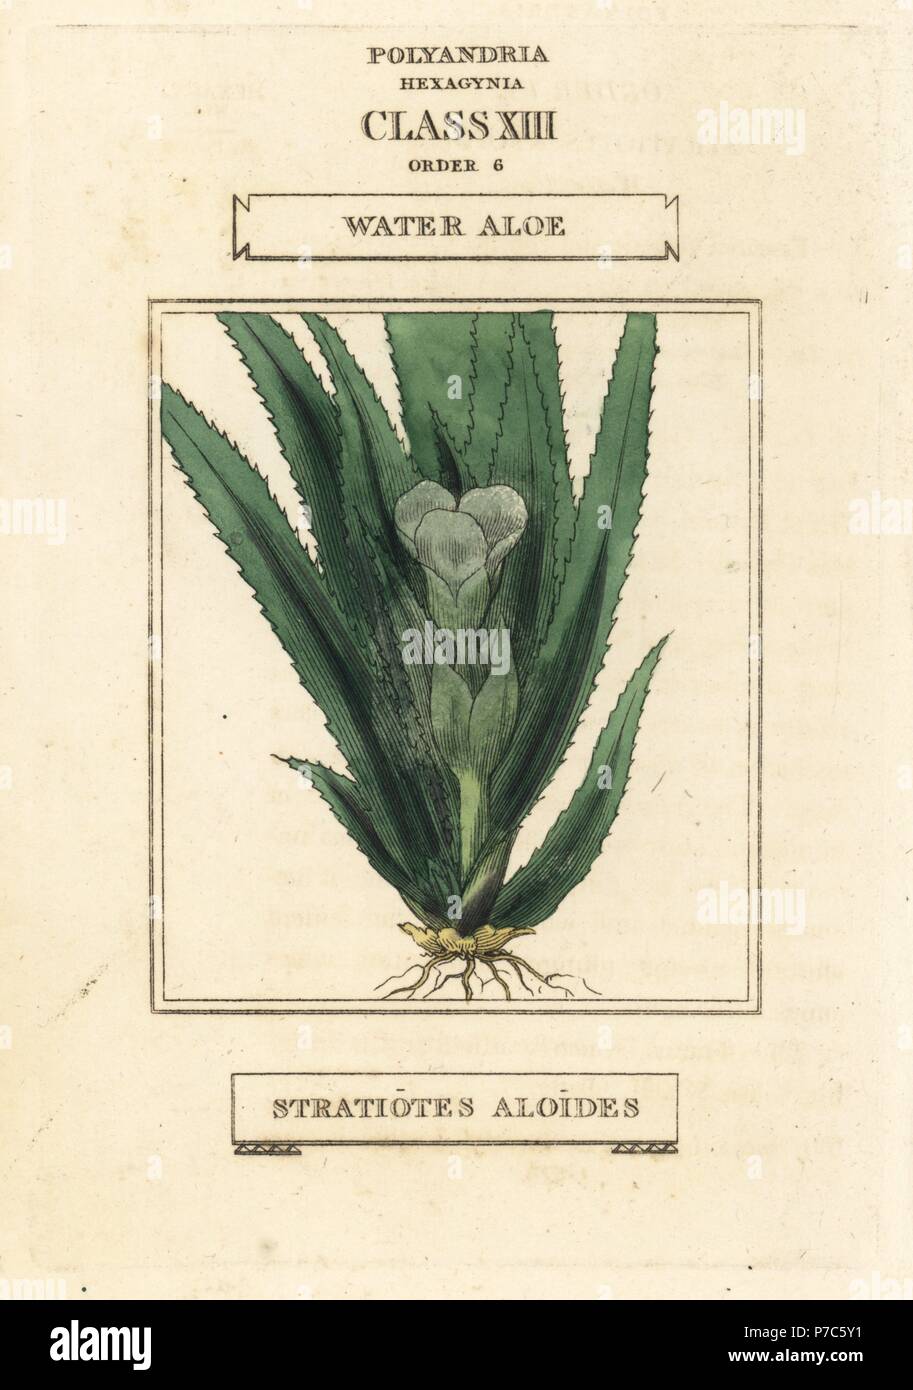 Water soldier or water aloe, Stratiotes aloides. Handcoloured copperplate engraving after an illustration by Richard Duppa from his The Classes and Orders of the Linnaean System of Botany, Longman, Hurst, London, 1816. Stock Photo